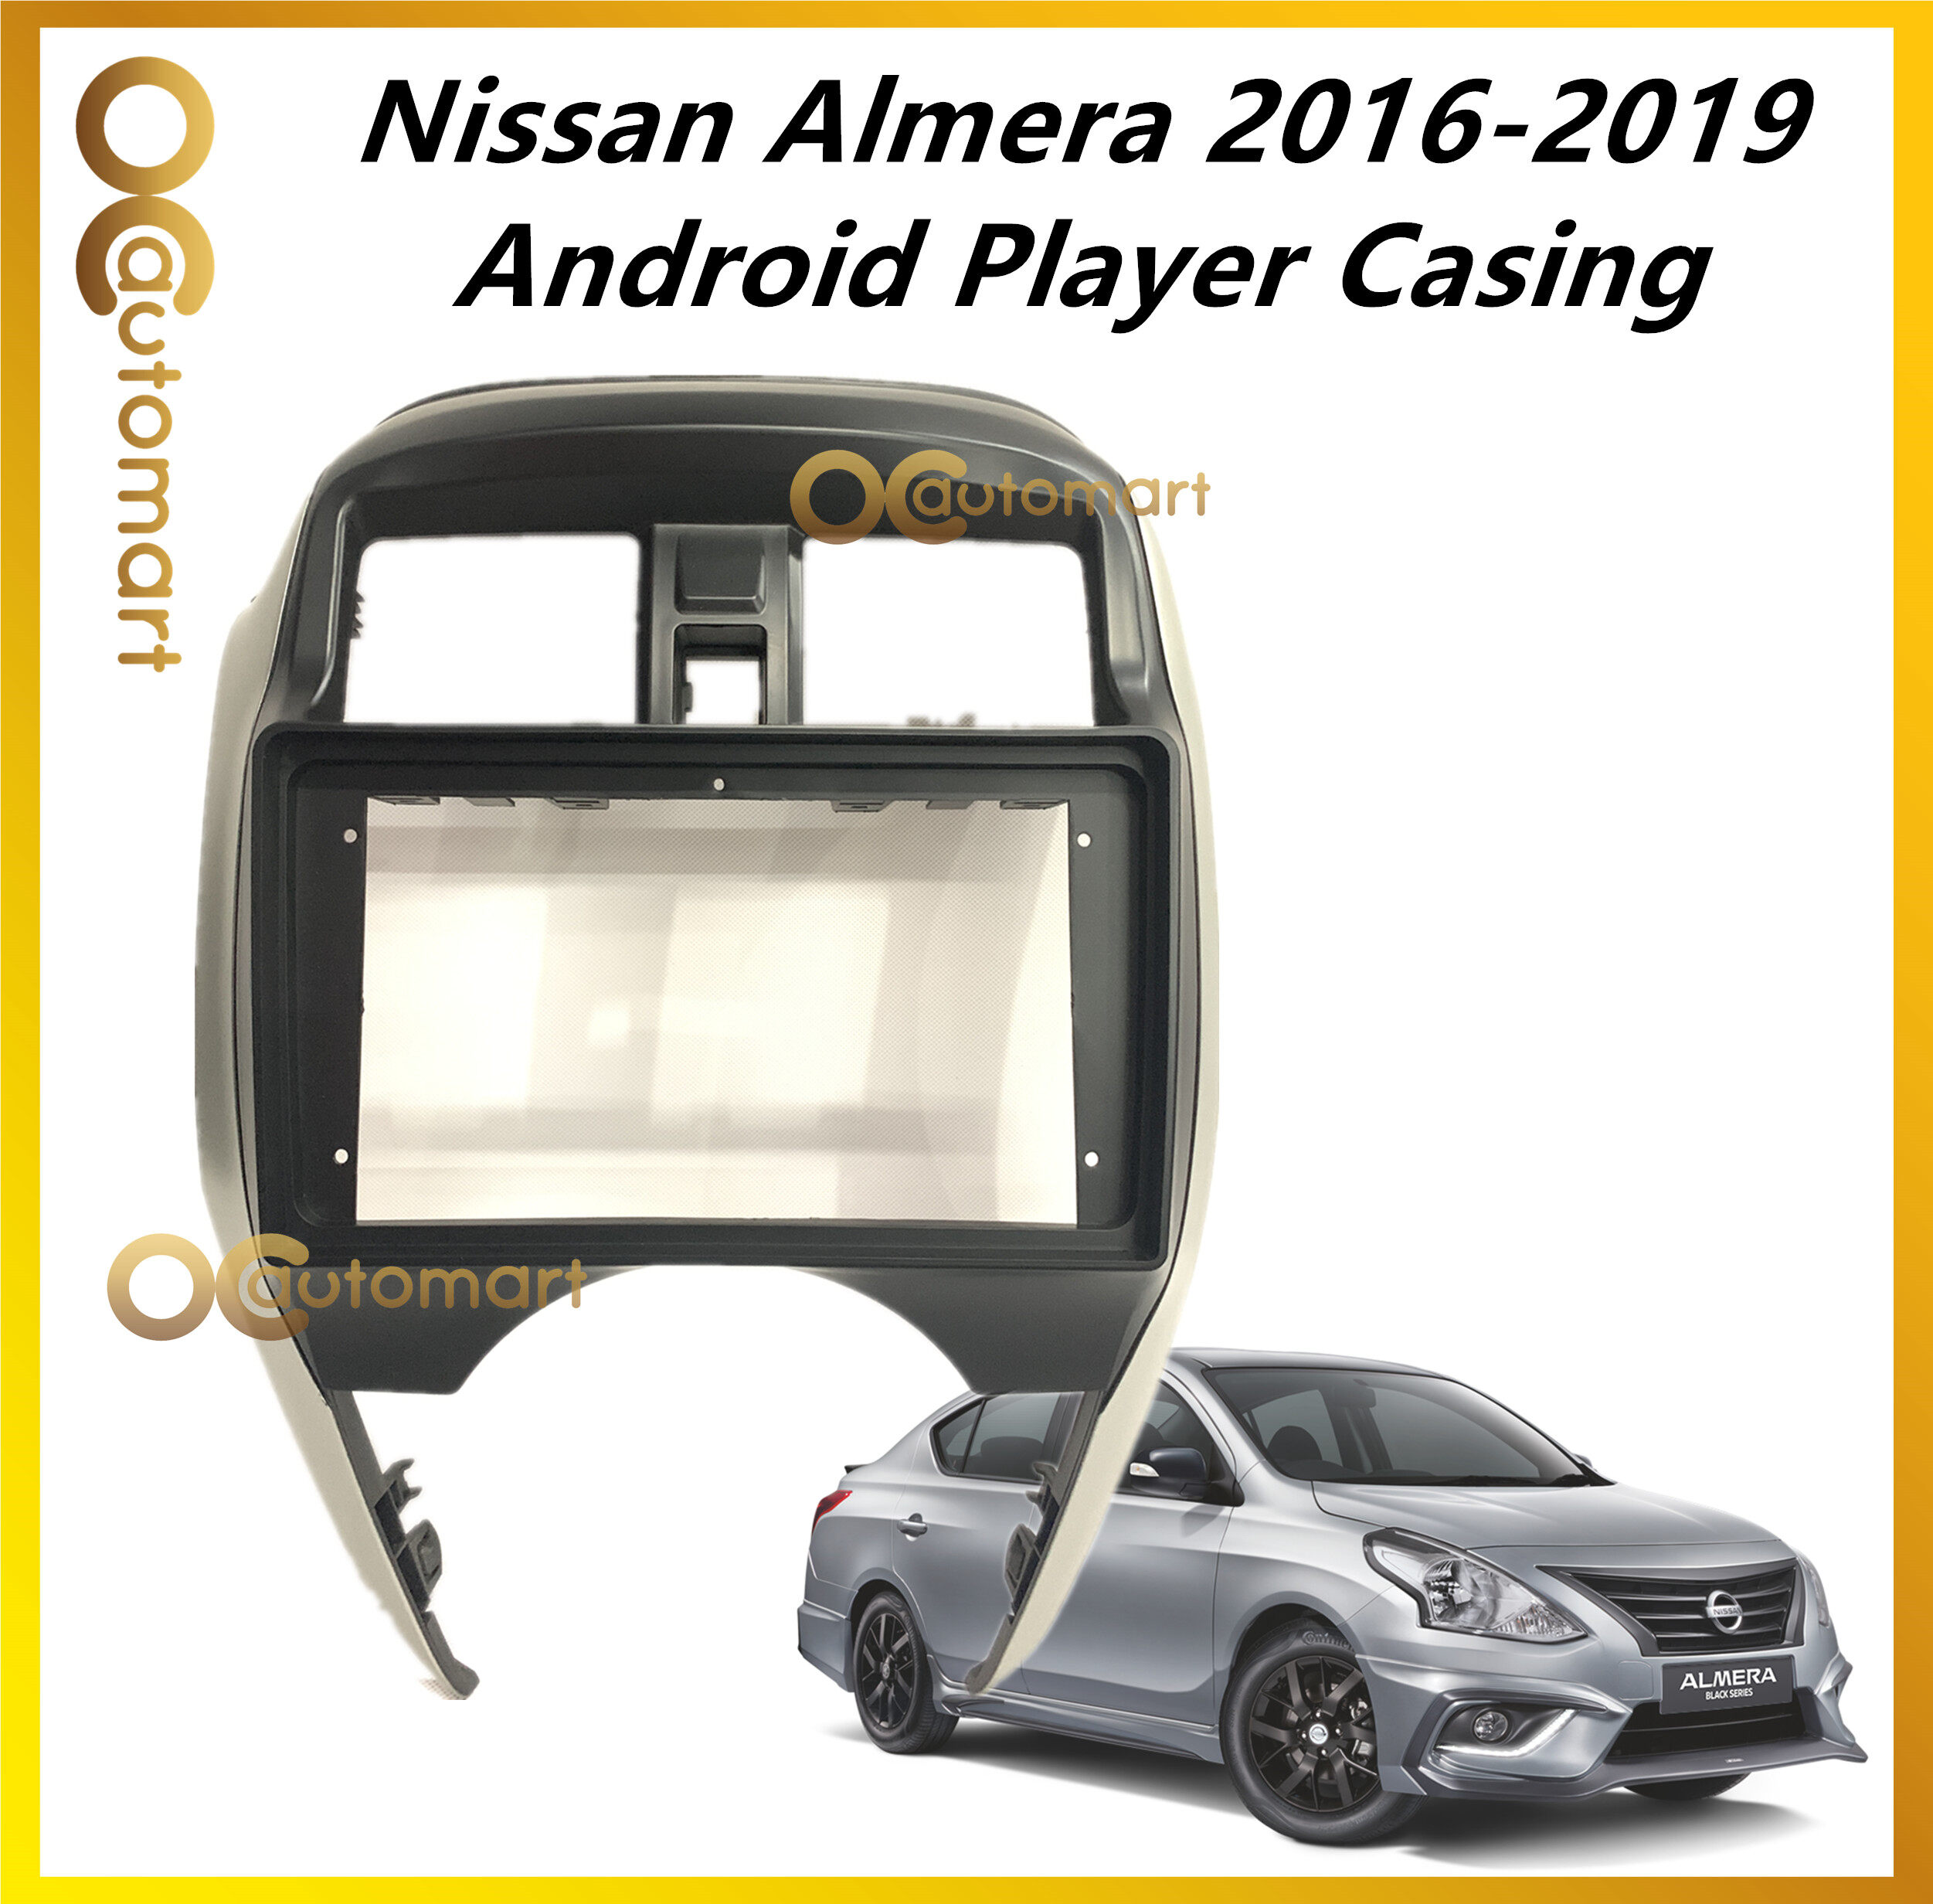 Nissan Almera 2016- 2019 Android Player Casing 9inch